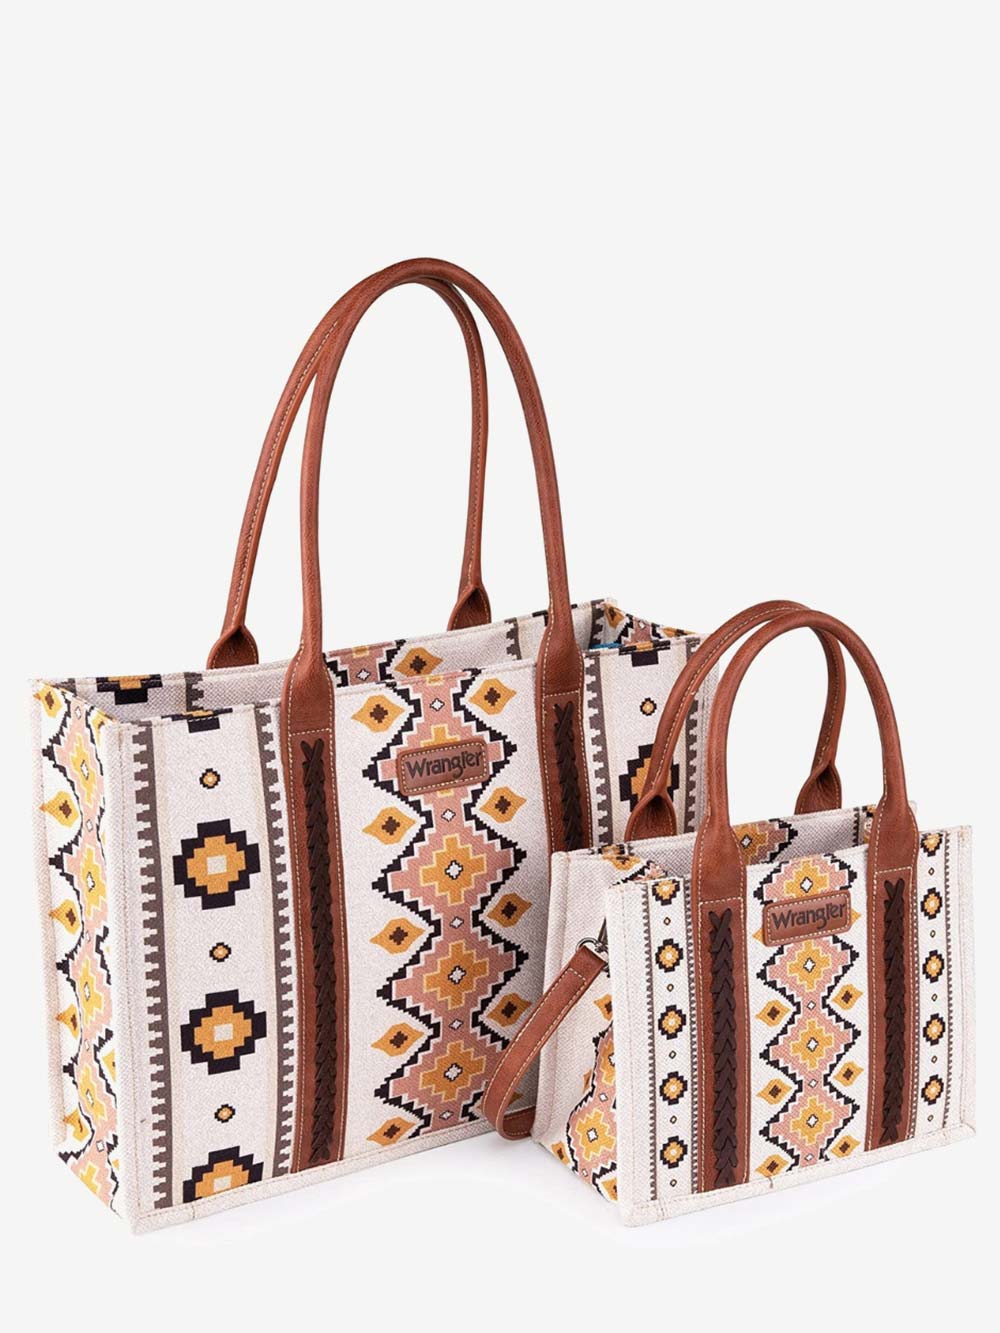 2023 Fall New Viral Wrangler Aztec Southwestern Dual Sided Print Canvas Tote/Crossbody Bag Collection Black Wide Tote & Small Tote/Crossbody Set